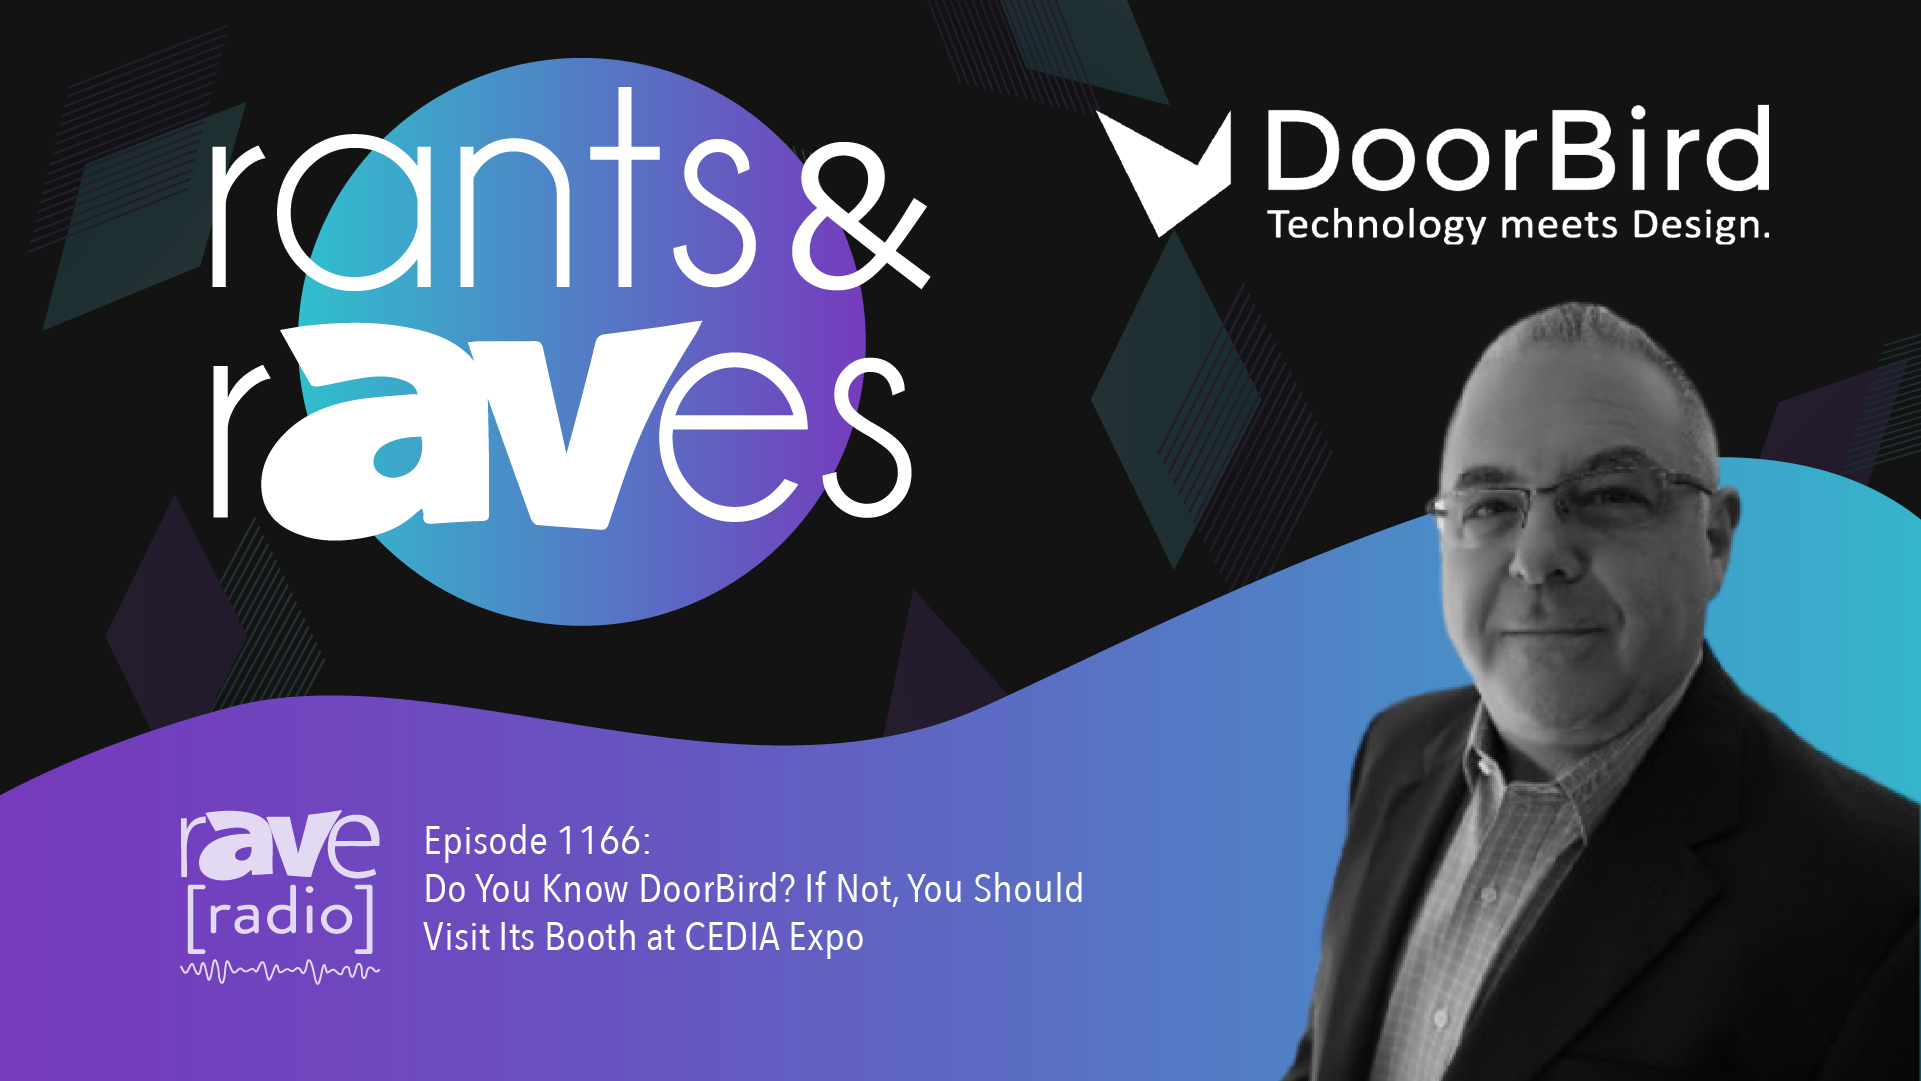 Rants & rAVes — Episode 1166: Do You Know DoorBird? If Not, You Should Visit Its Booth at CEDIA Expo